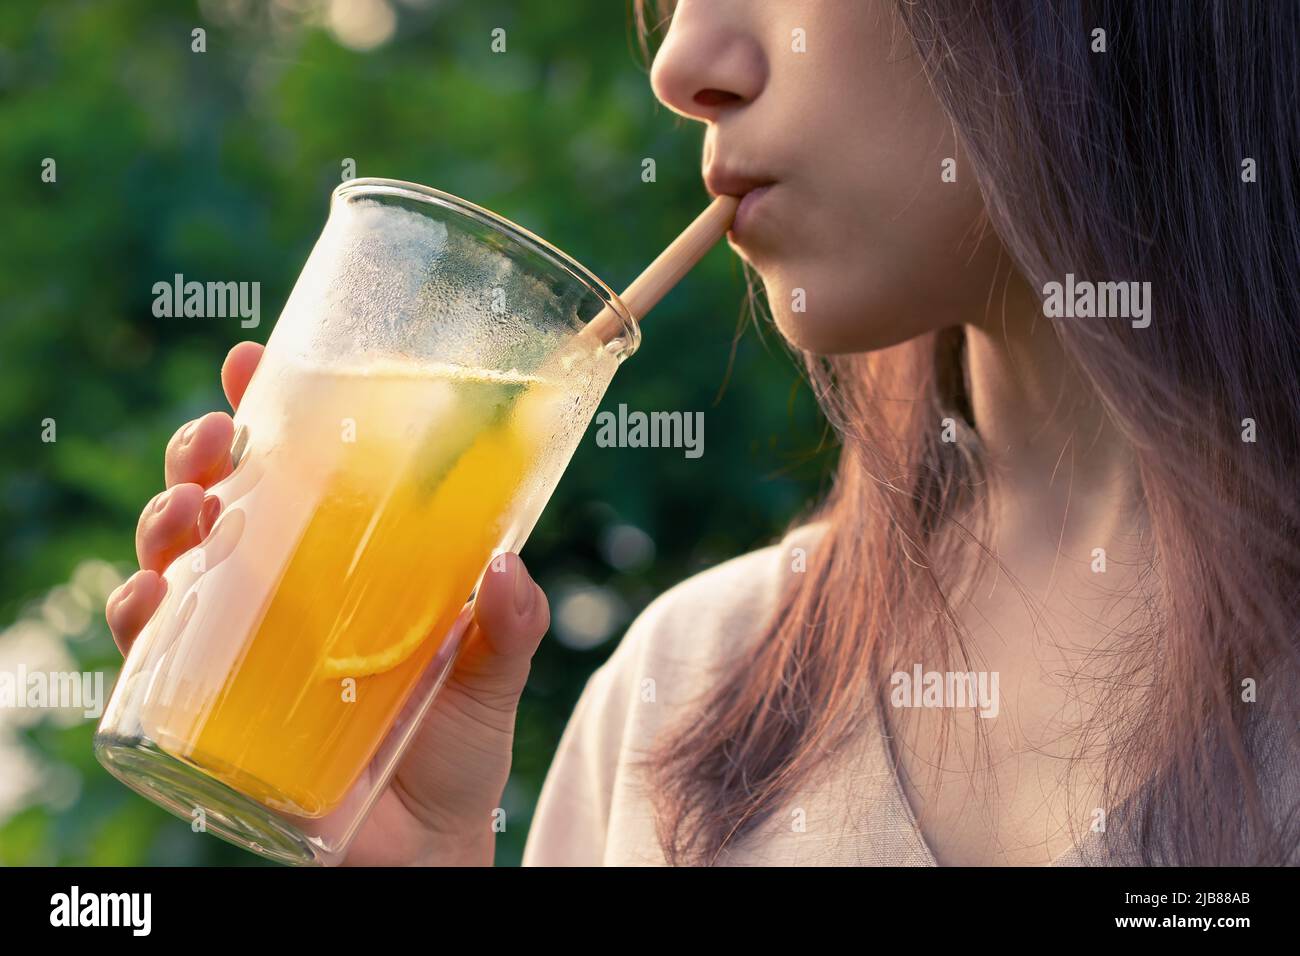 Girl drinks from a glass with fresh orange summer cocktail, close-up, selective focus. Stock Photo